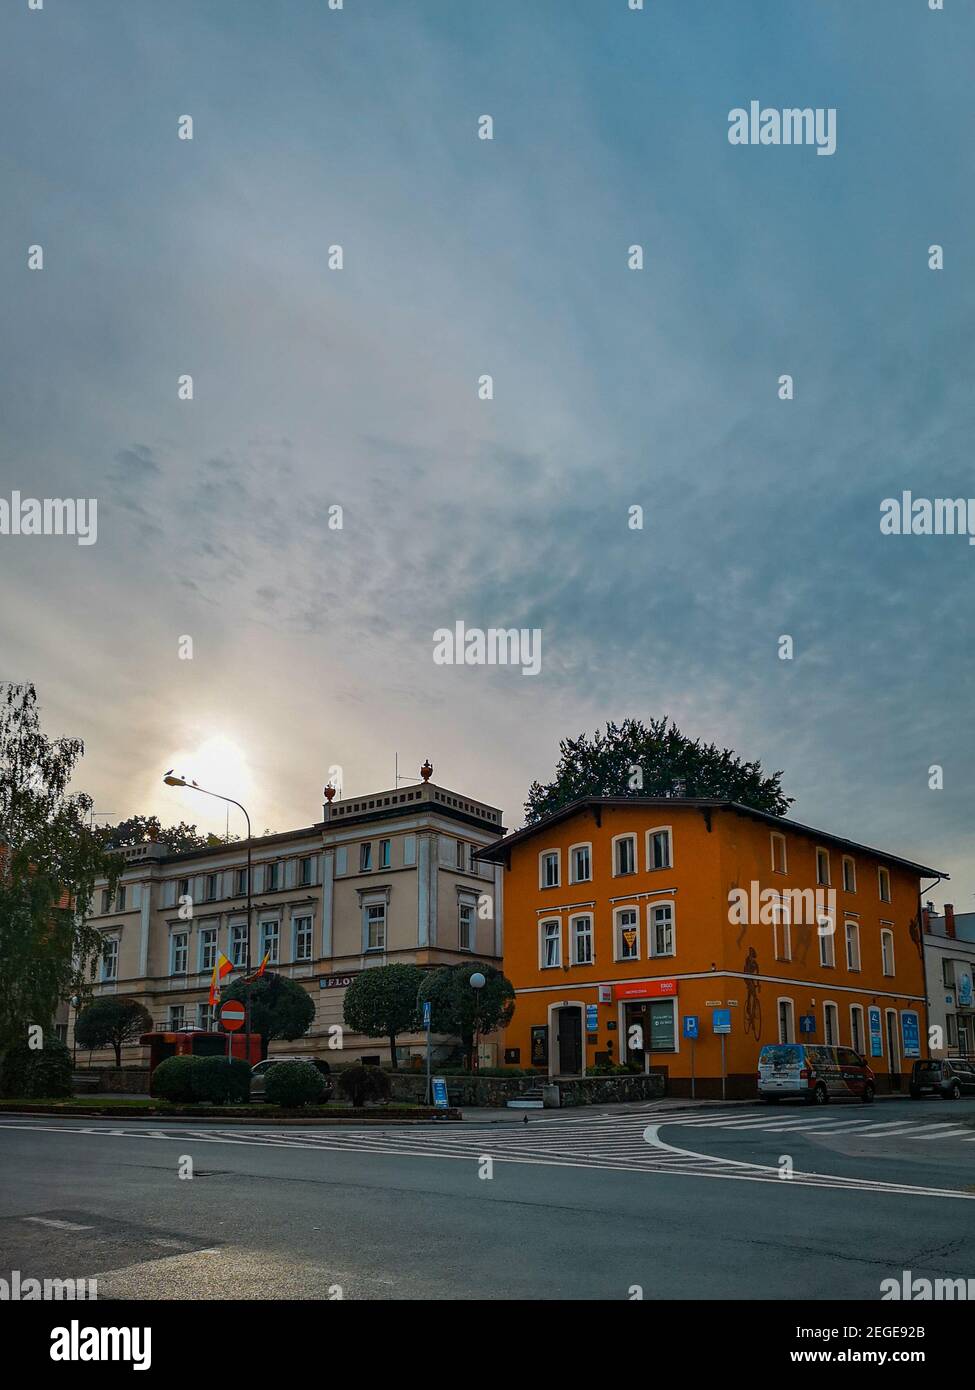 Jelenia Gora September 8 2019 City streets and colorful buildings at cloudy morning Stock Photo